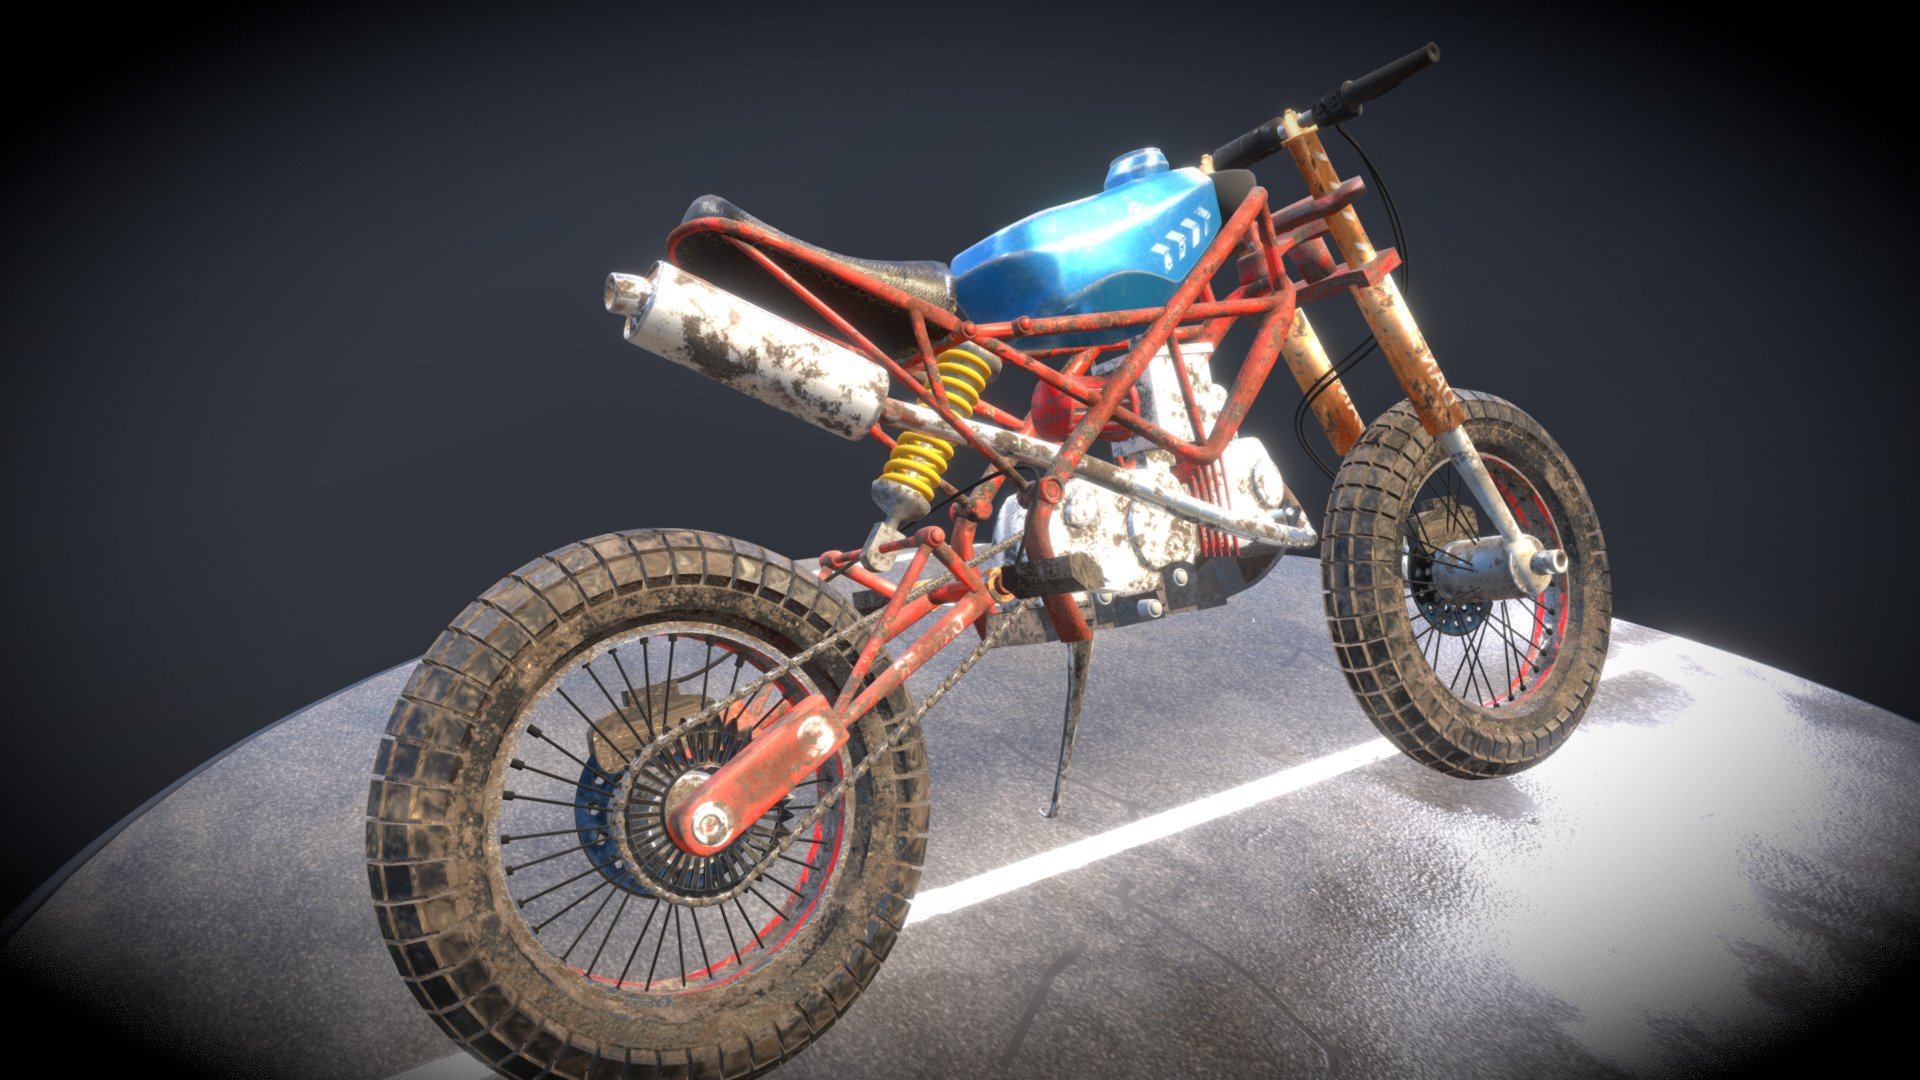 Concept offroad Bike model that i created using blender.I use Substance painter For Texturing 3d model